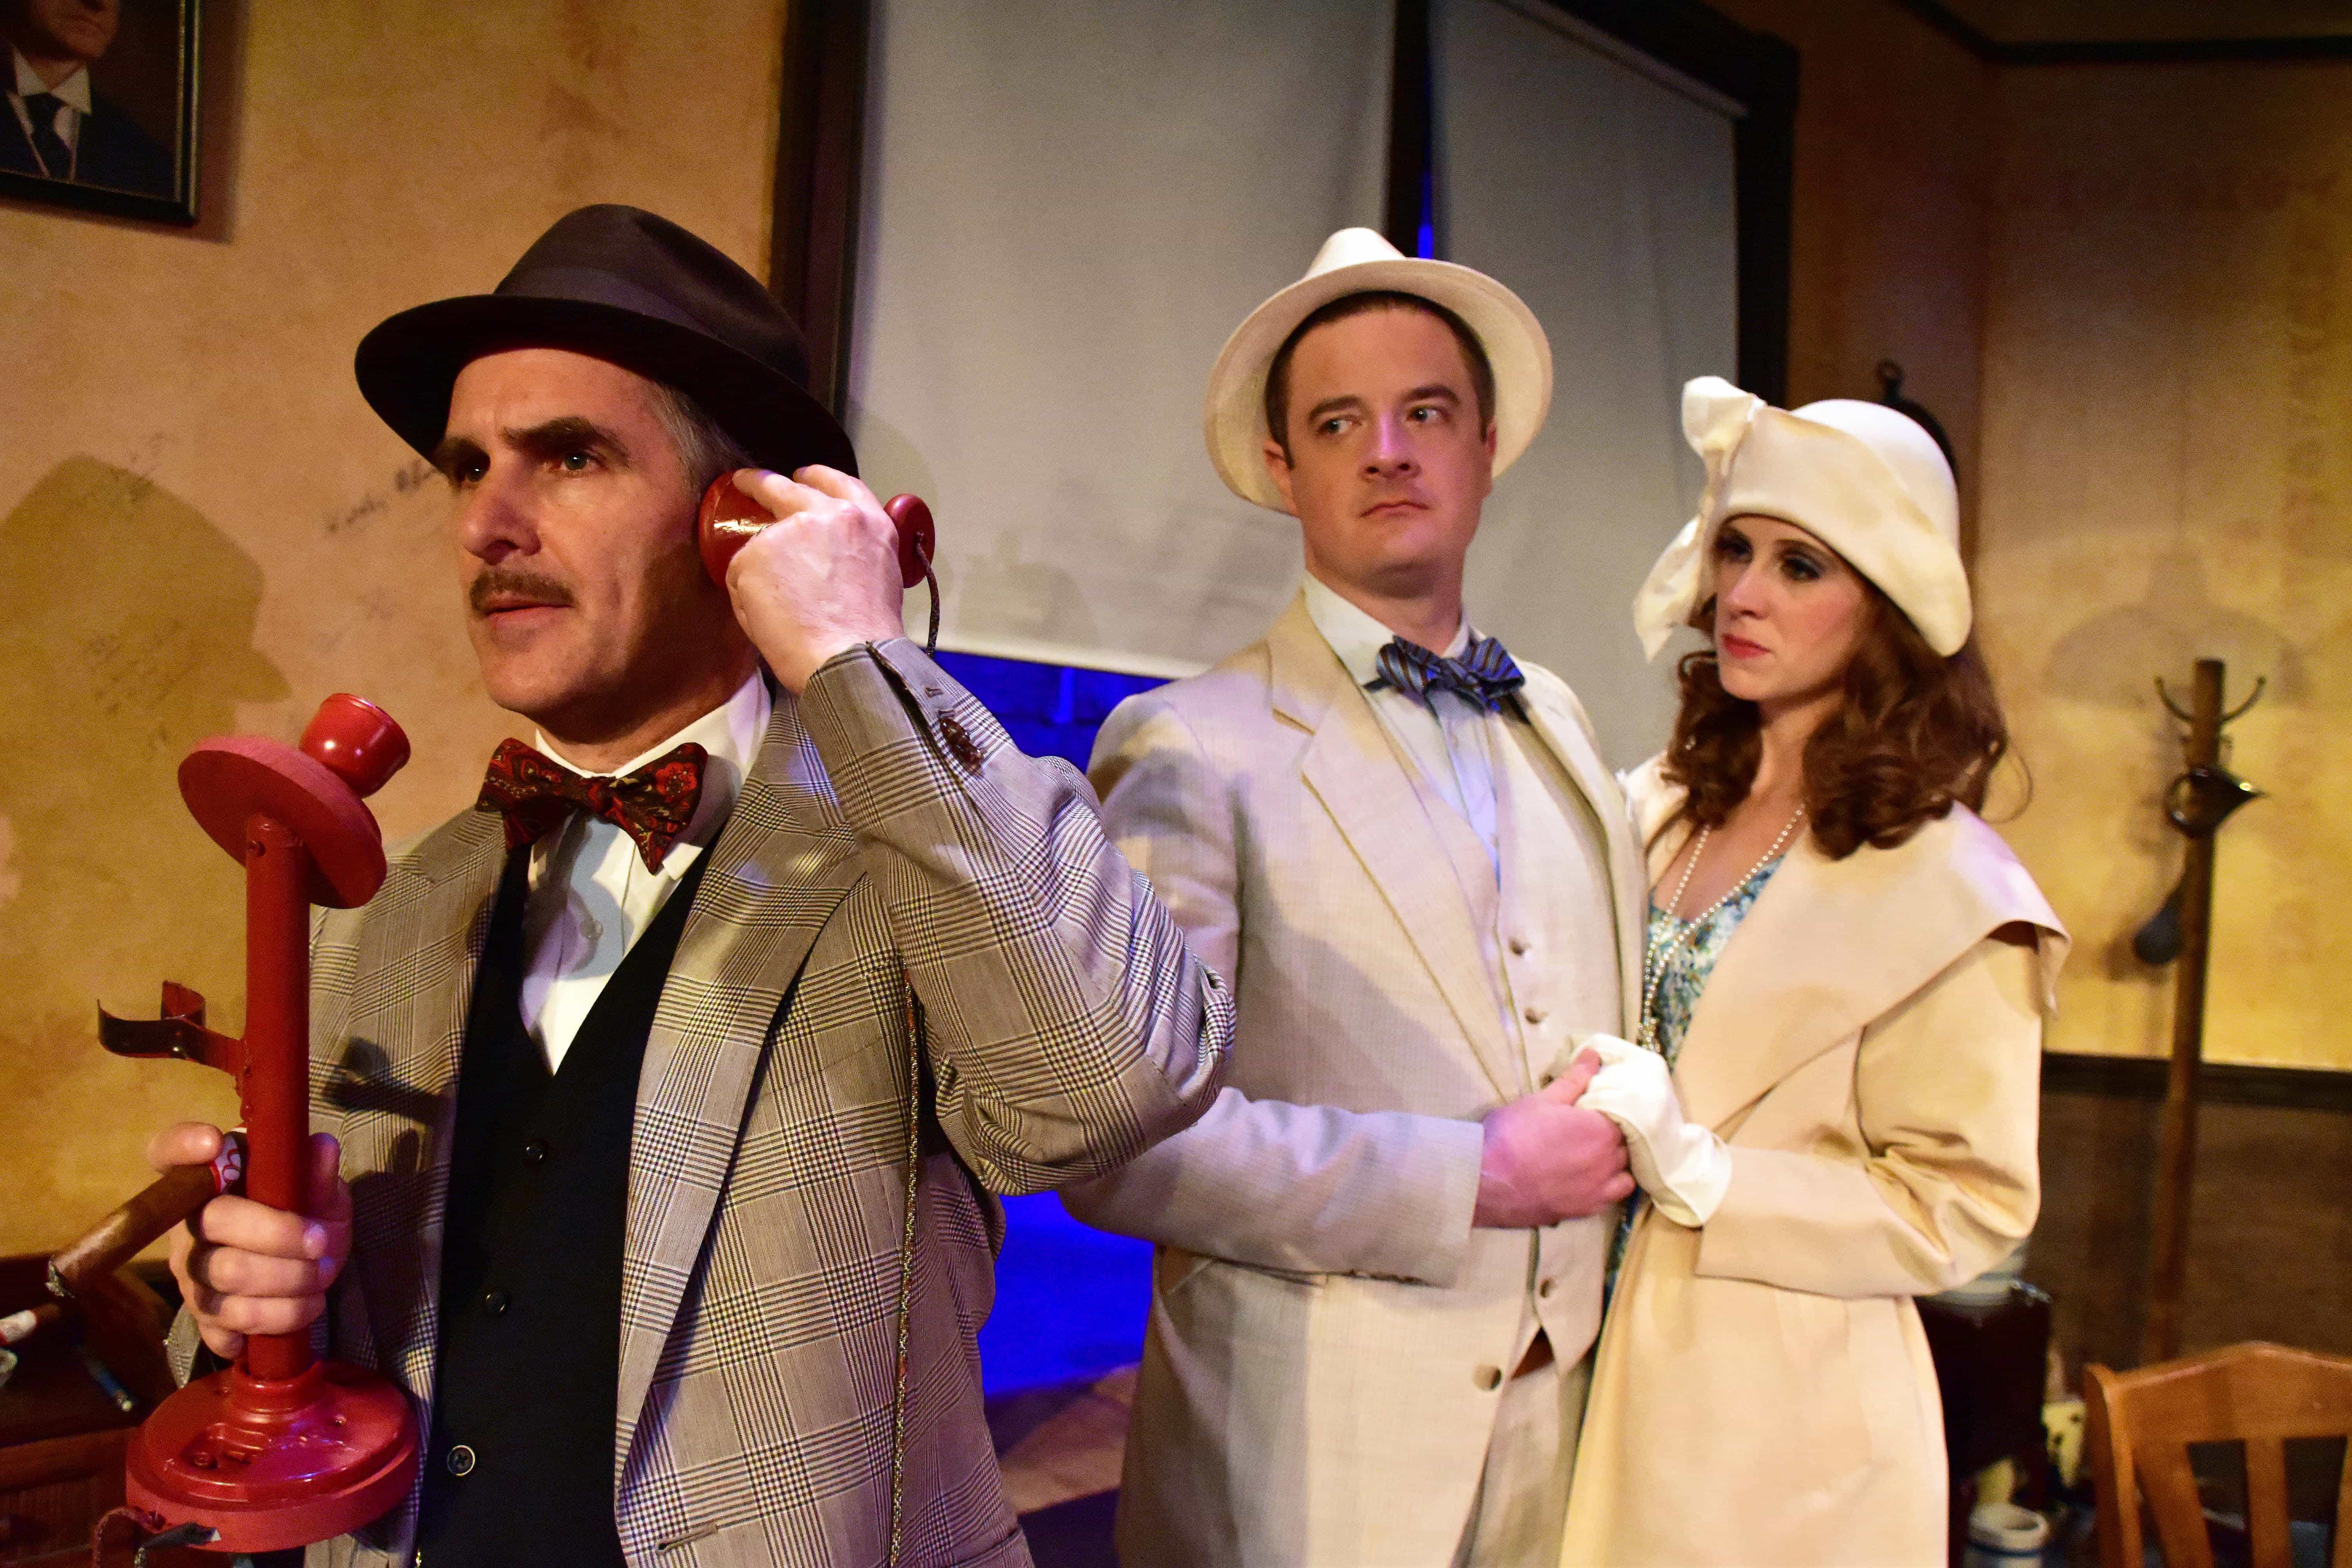 L to R: David Whitehead as Walter Burns, Jaclyn Robertson as Peggy Grant and Chuck O’Toole as Hildy Johnson in the Providence Players production of The Front Page at the James Lee Community Center Theater. Photo by Chip Gertzog.